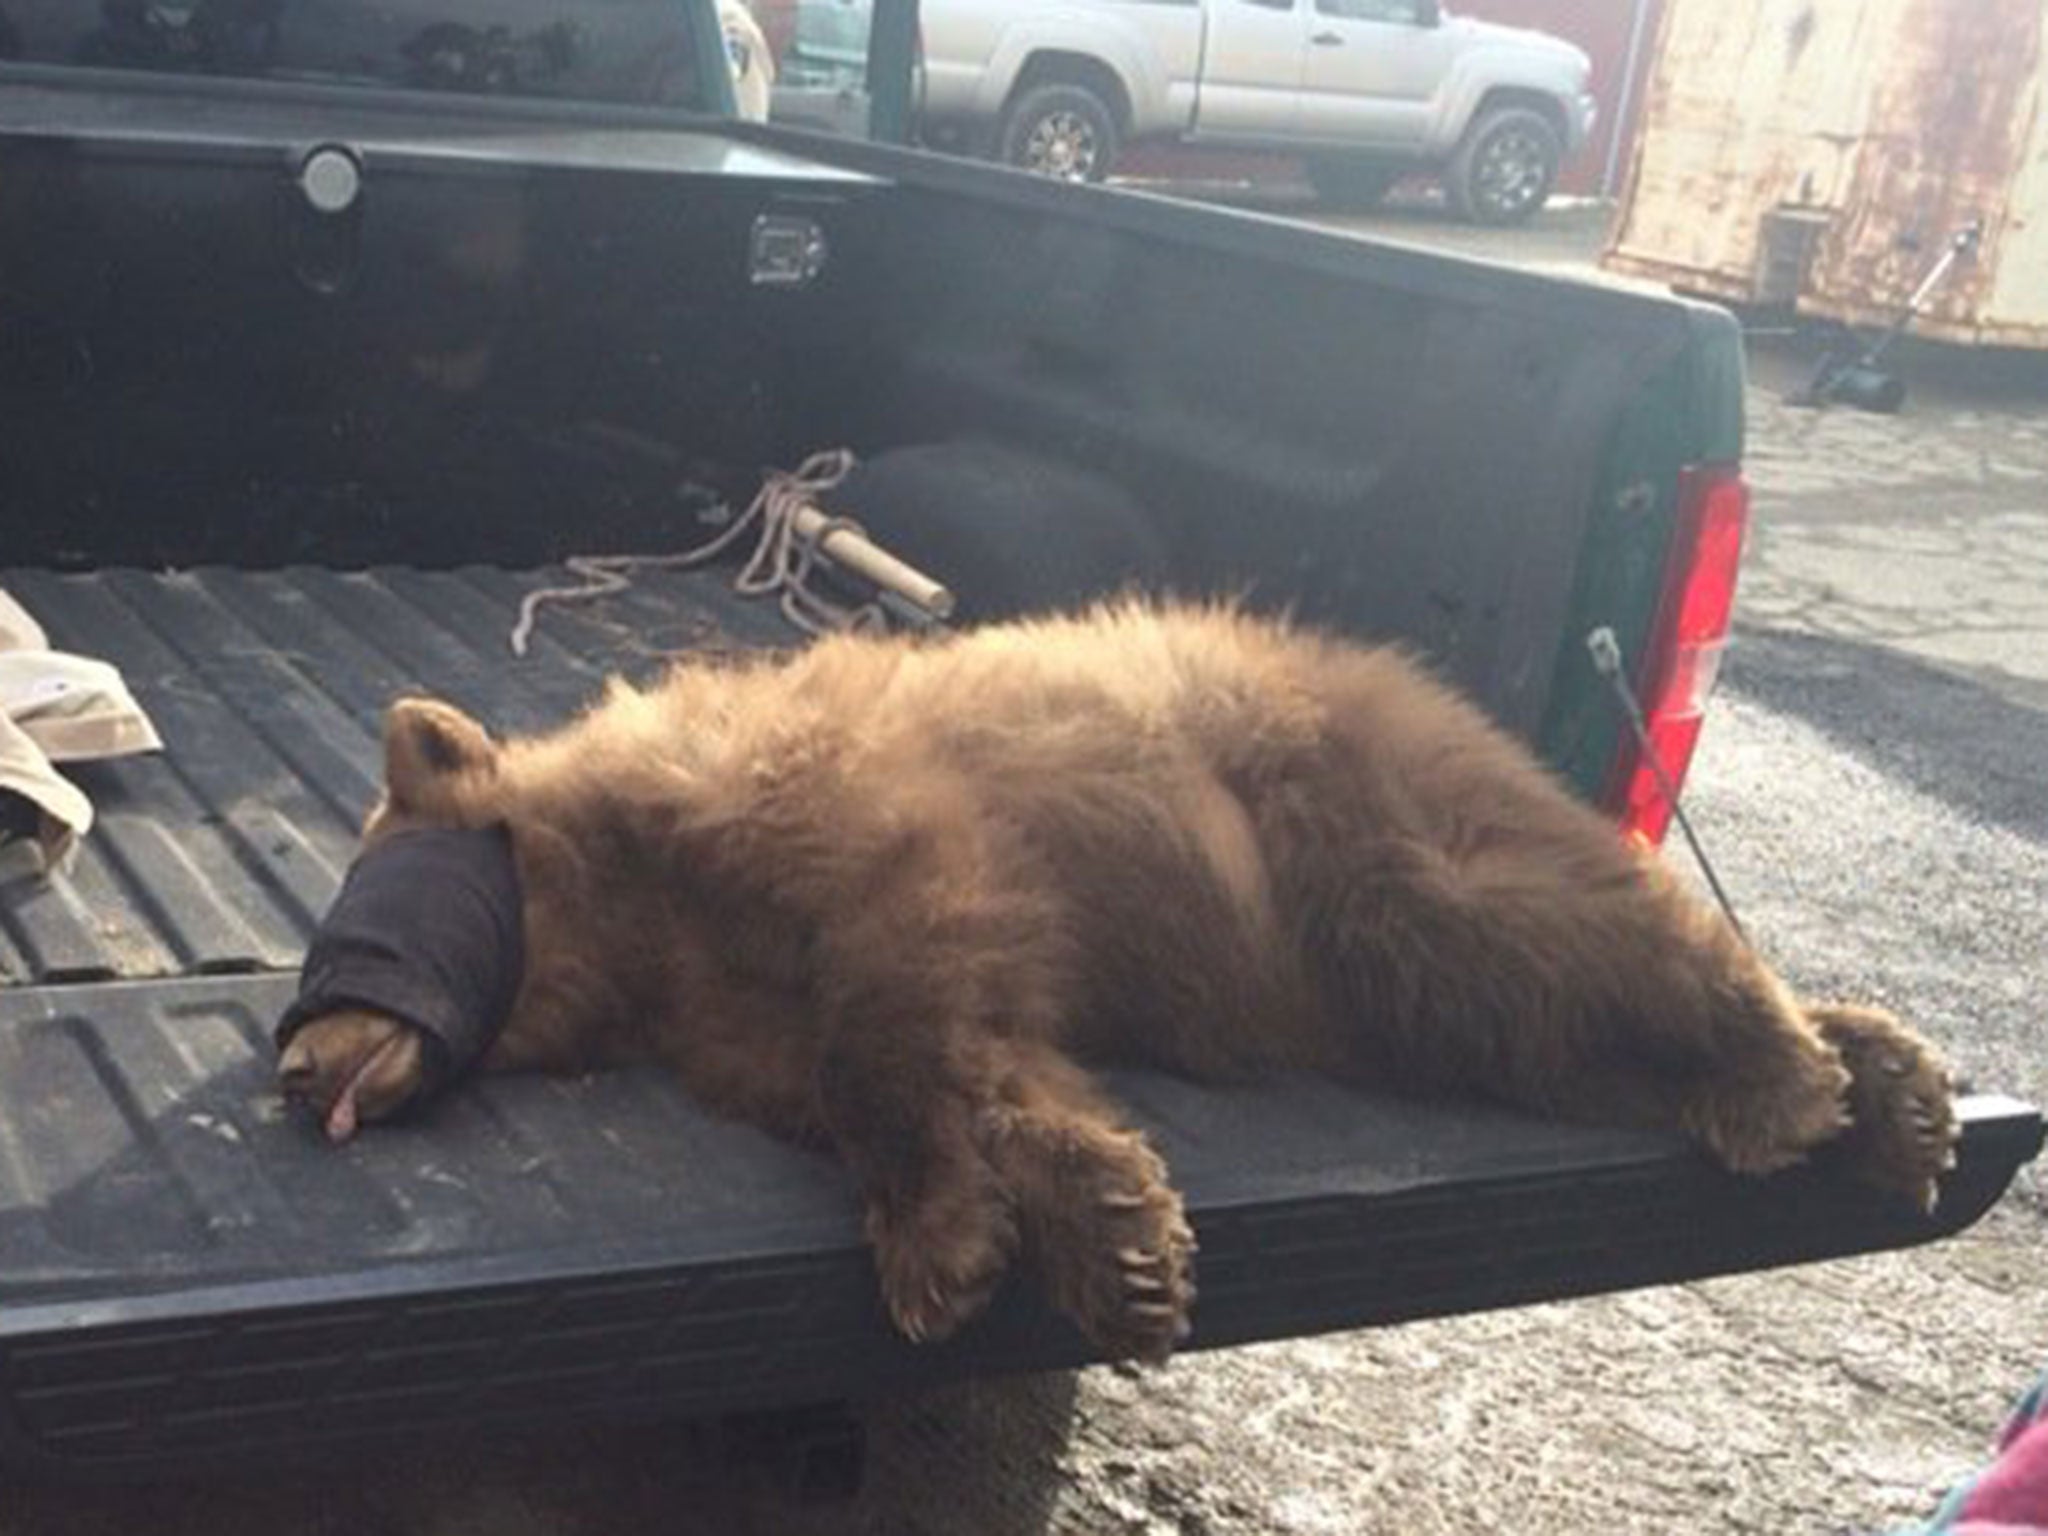 Fresno Police photographed the bear and assured the public that it was unharmed and no one was injured